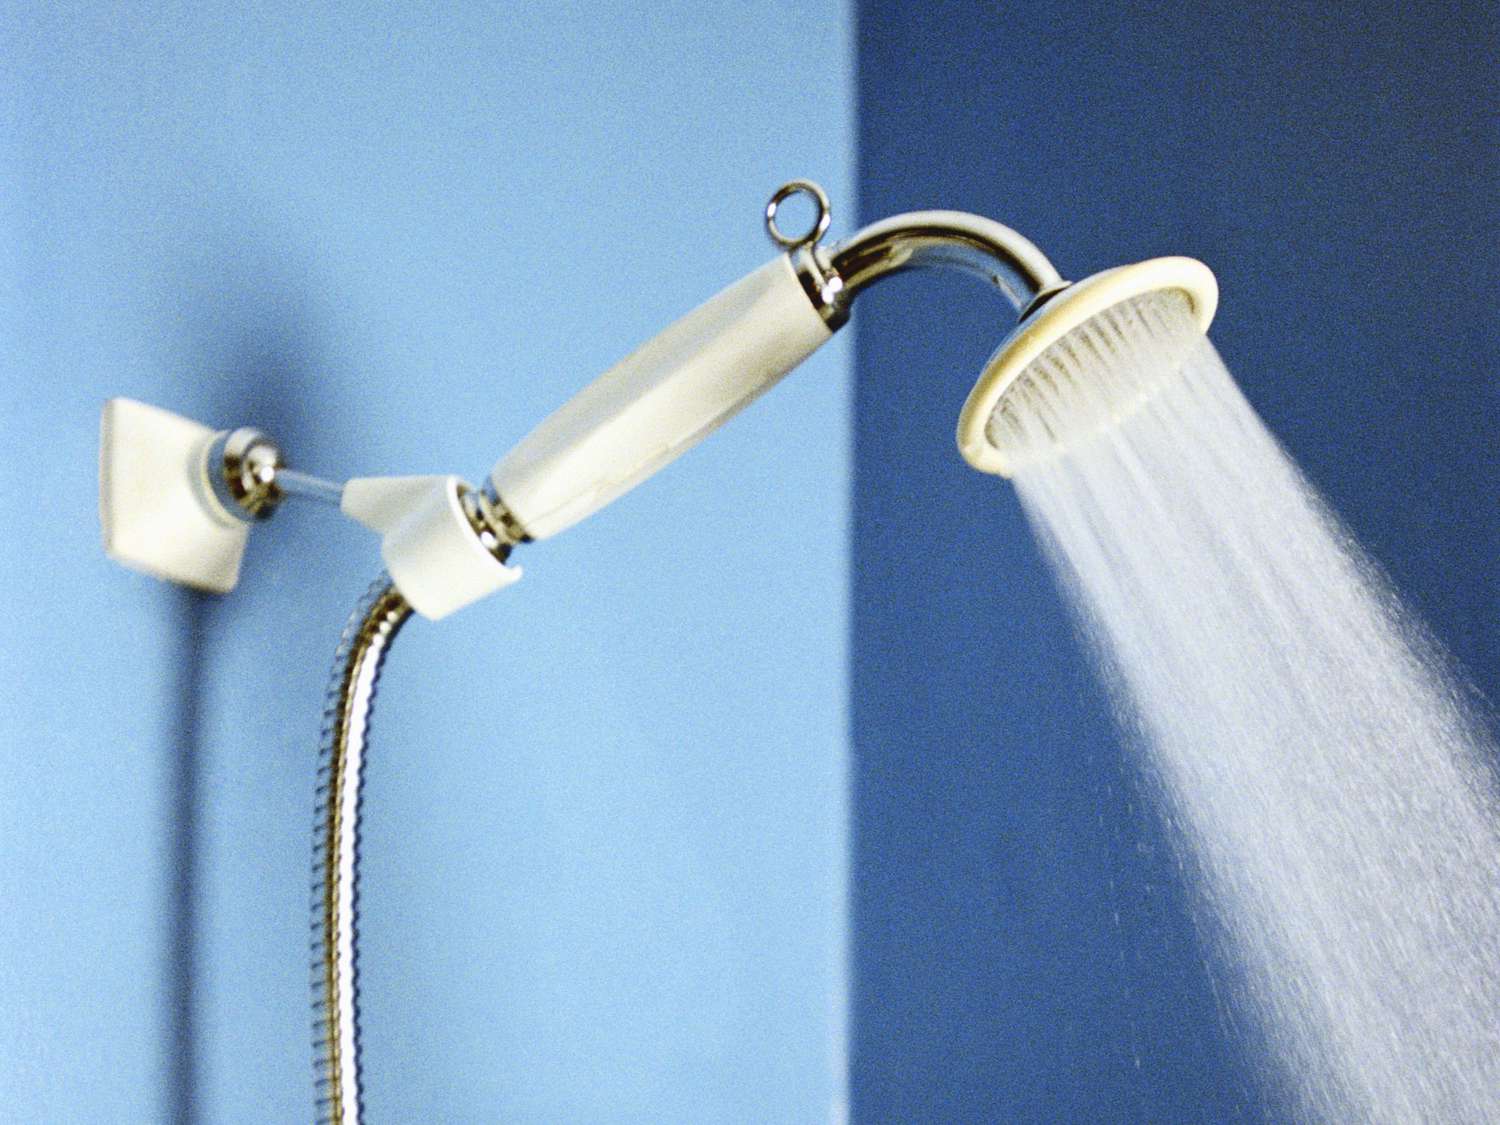 Shower Heads For Well Water